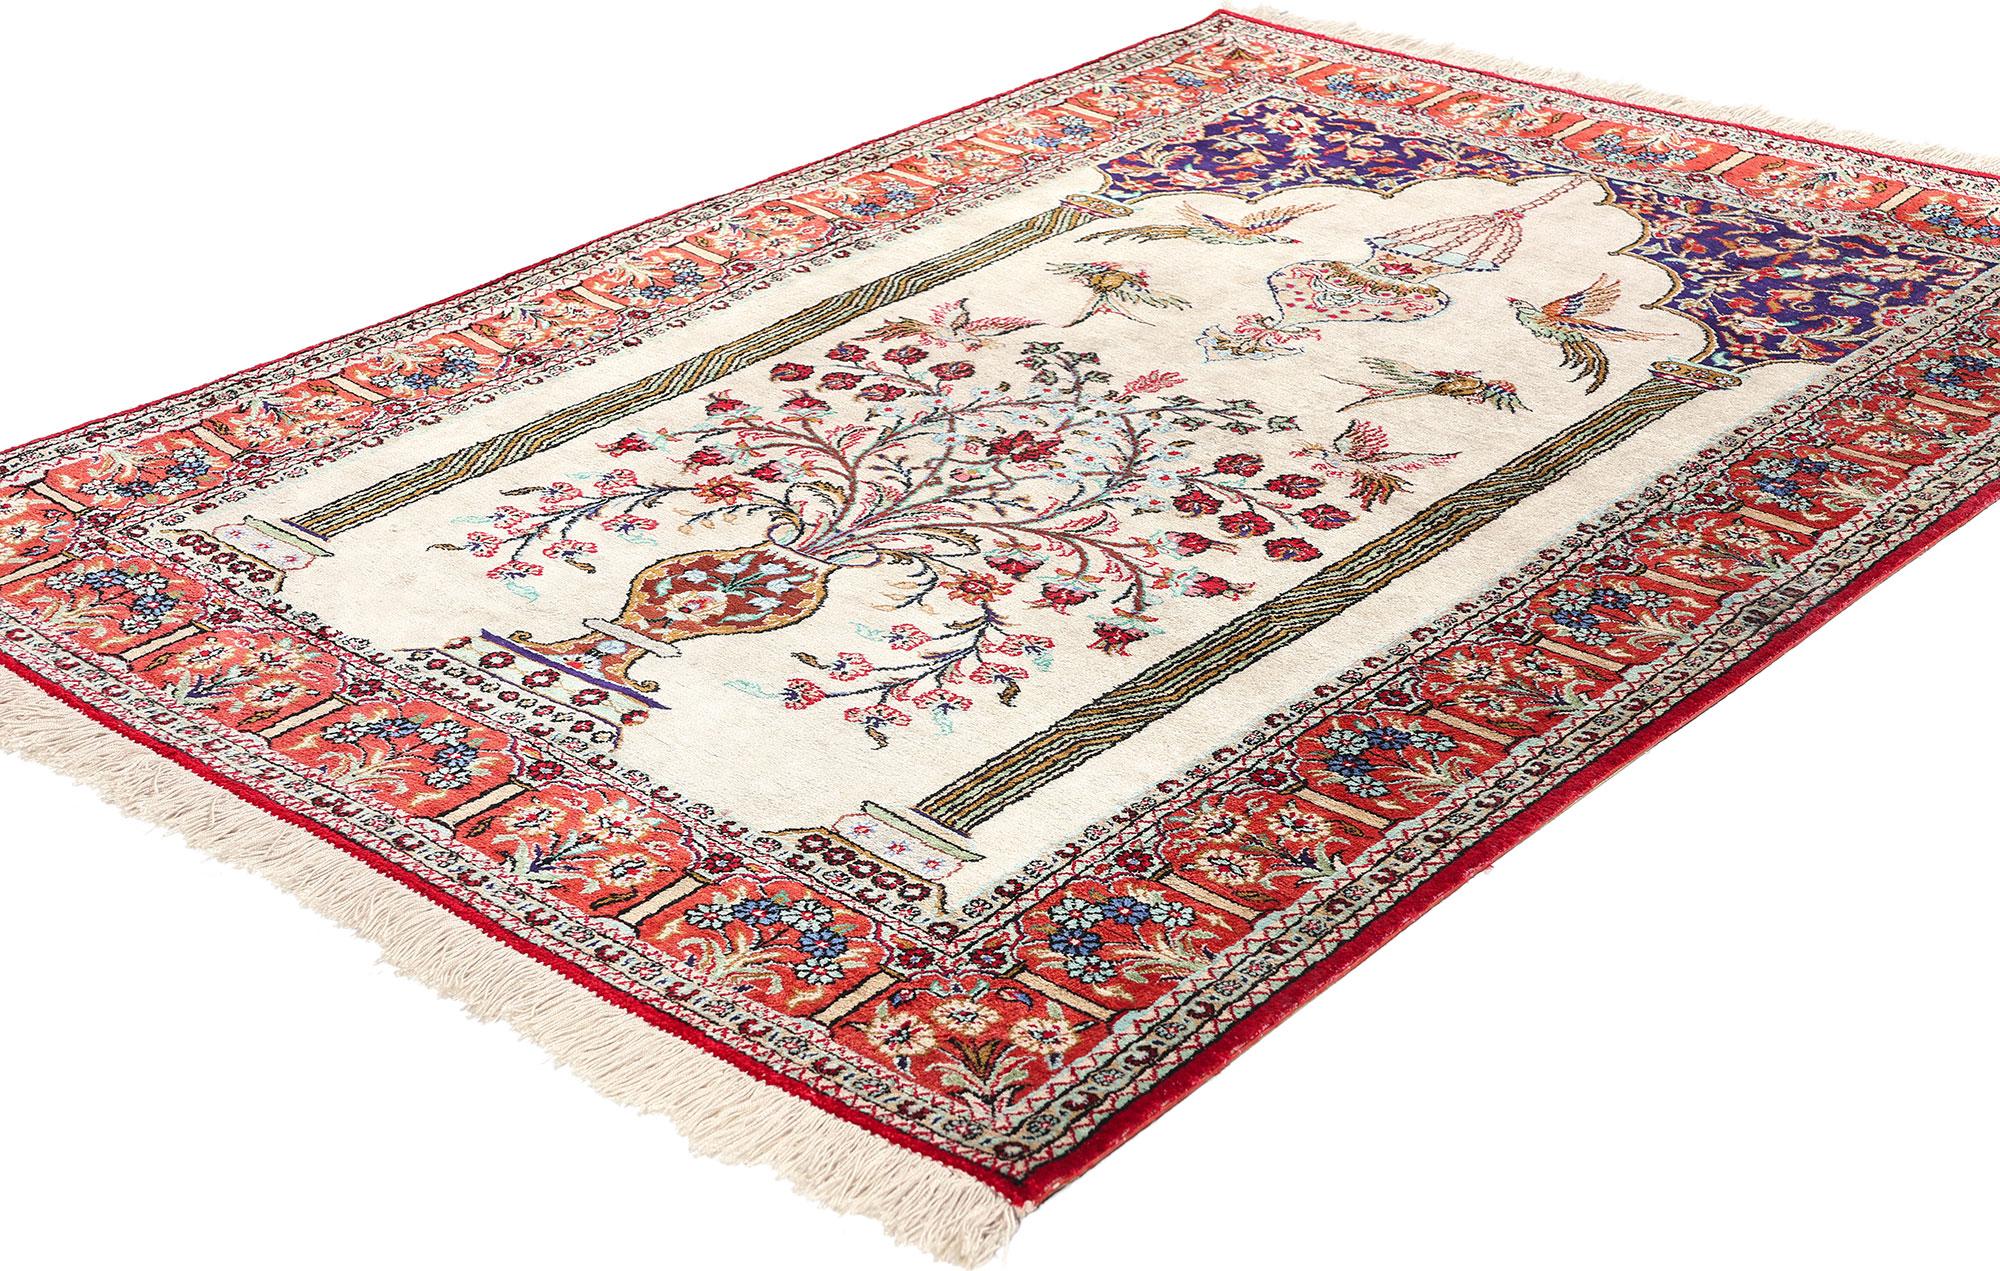 78782 Vintage Persian Silk Qum Prayer Rug, 03'06 x 05'00. Persian silk Qum prayer rugs trace their roots to Qom, Iran, renowned for its opulent handwoven carpets woven from premium silk threads prized for their luxurious texture and shimmering